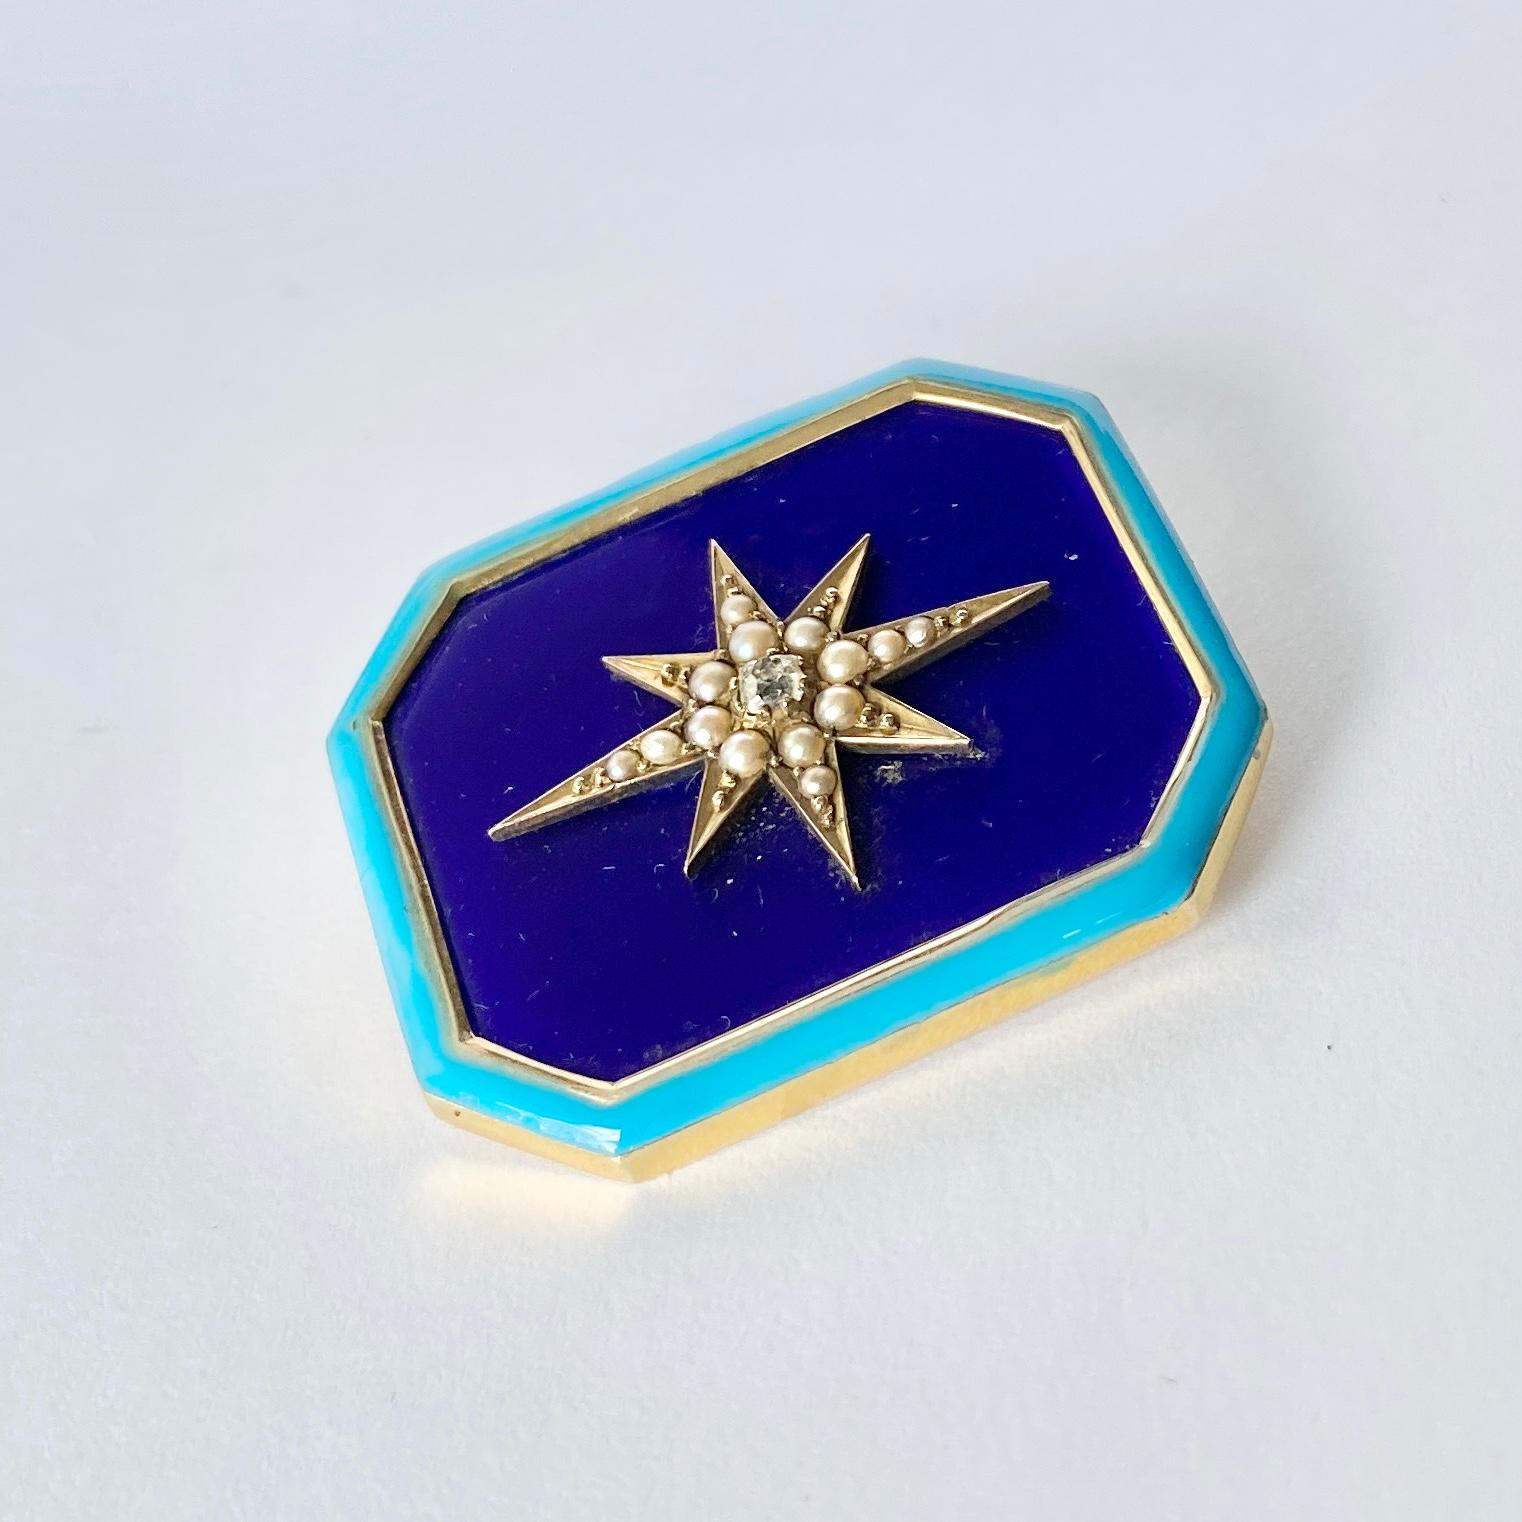 This 9ct gold brooch has a wonderful bright blue enamel on the face of it.  At the centre of the brooch there is a small sparkling diamond measuring 10pts and around it is a starburst of pearls. Comes in original box.

Dimensions: 37x32mm

Weight: